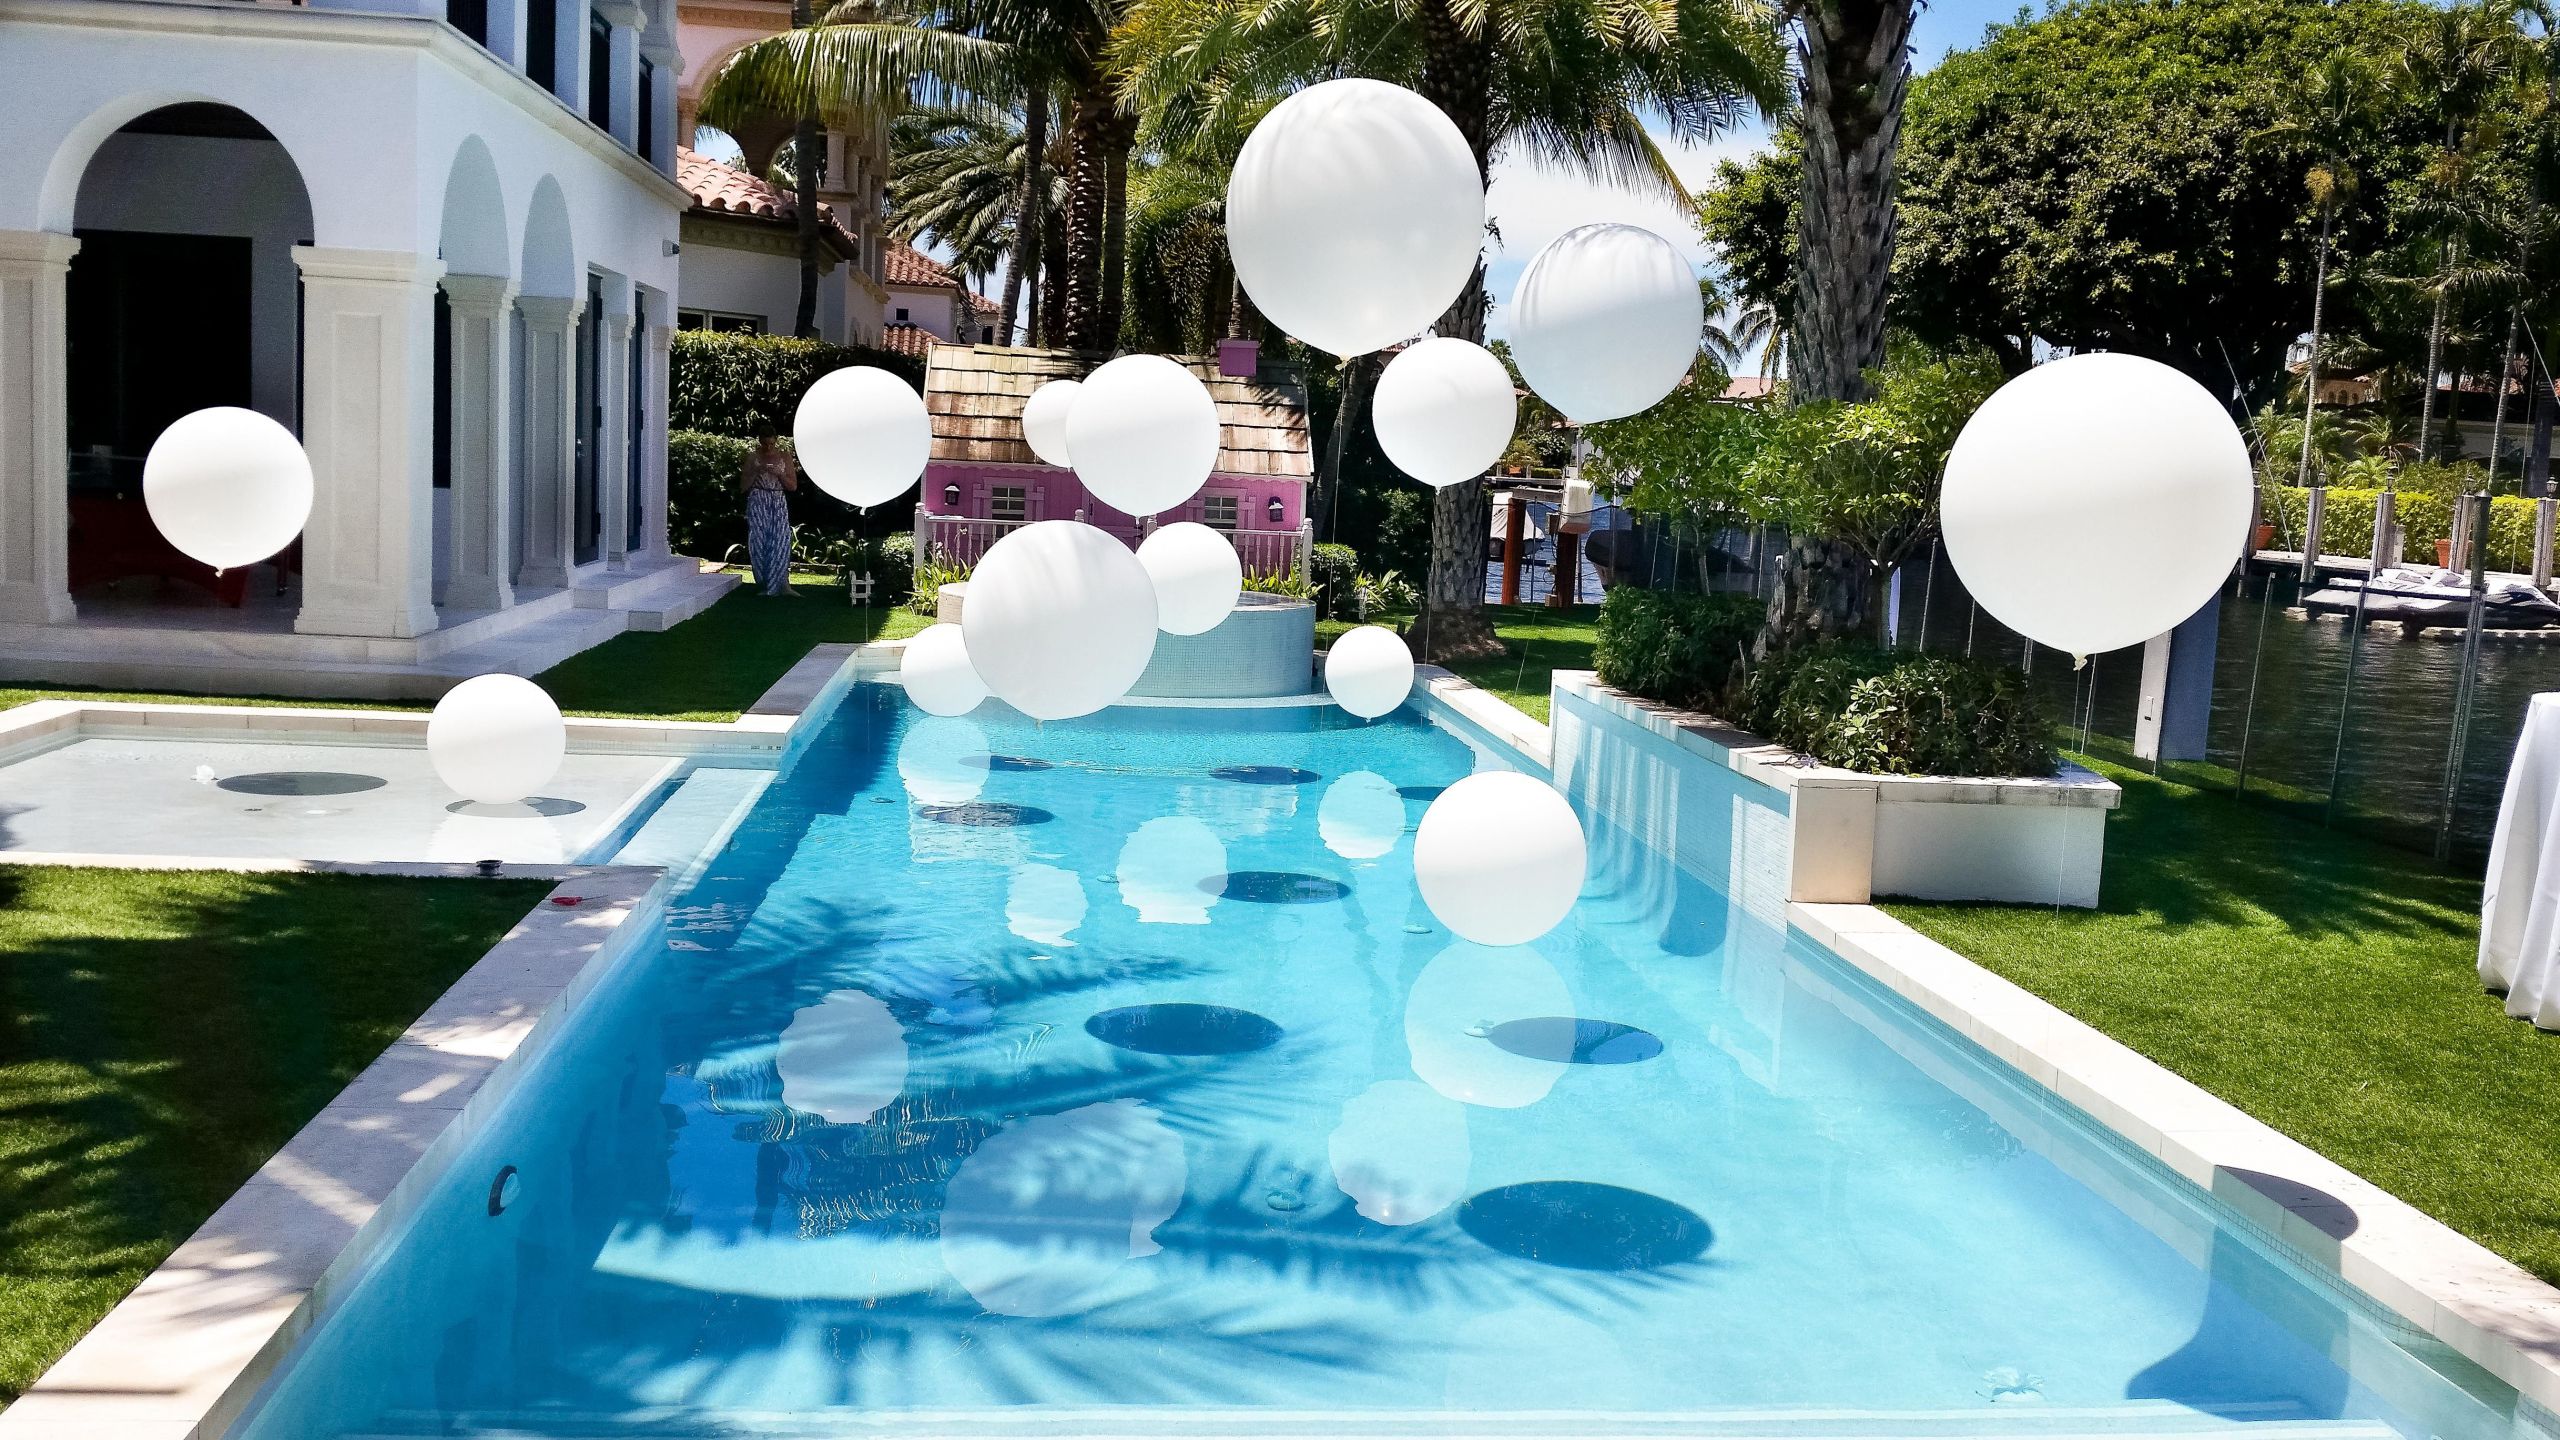 All White Pool Party Ideas
 Swimming pool party balloon decorations balloondecoration